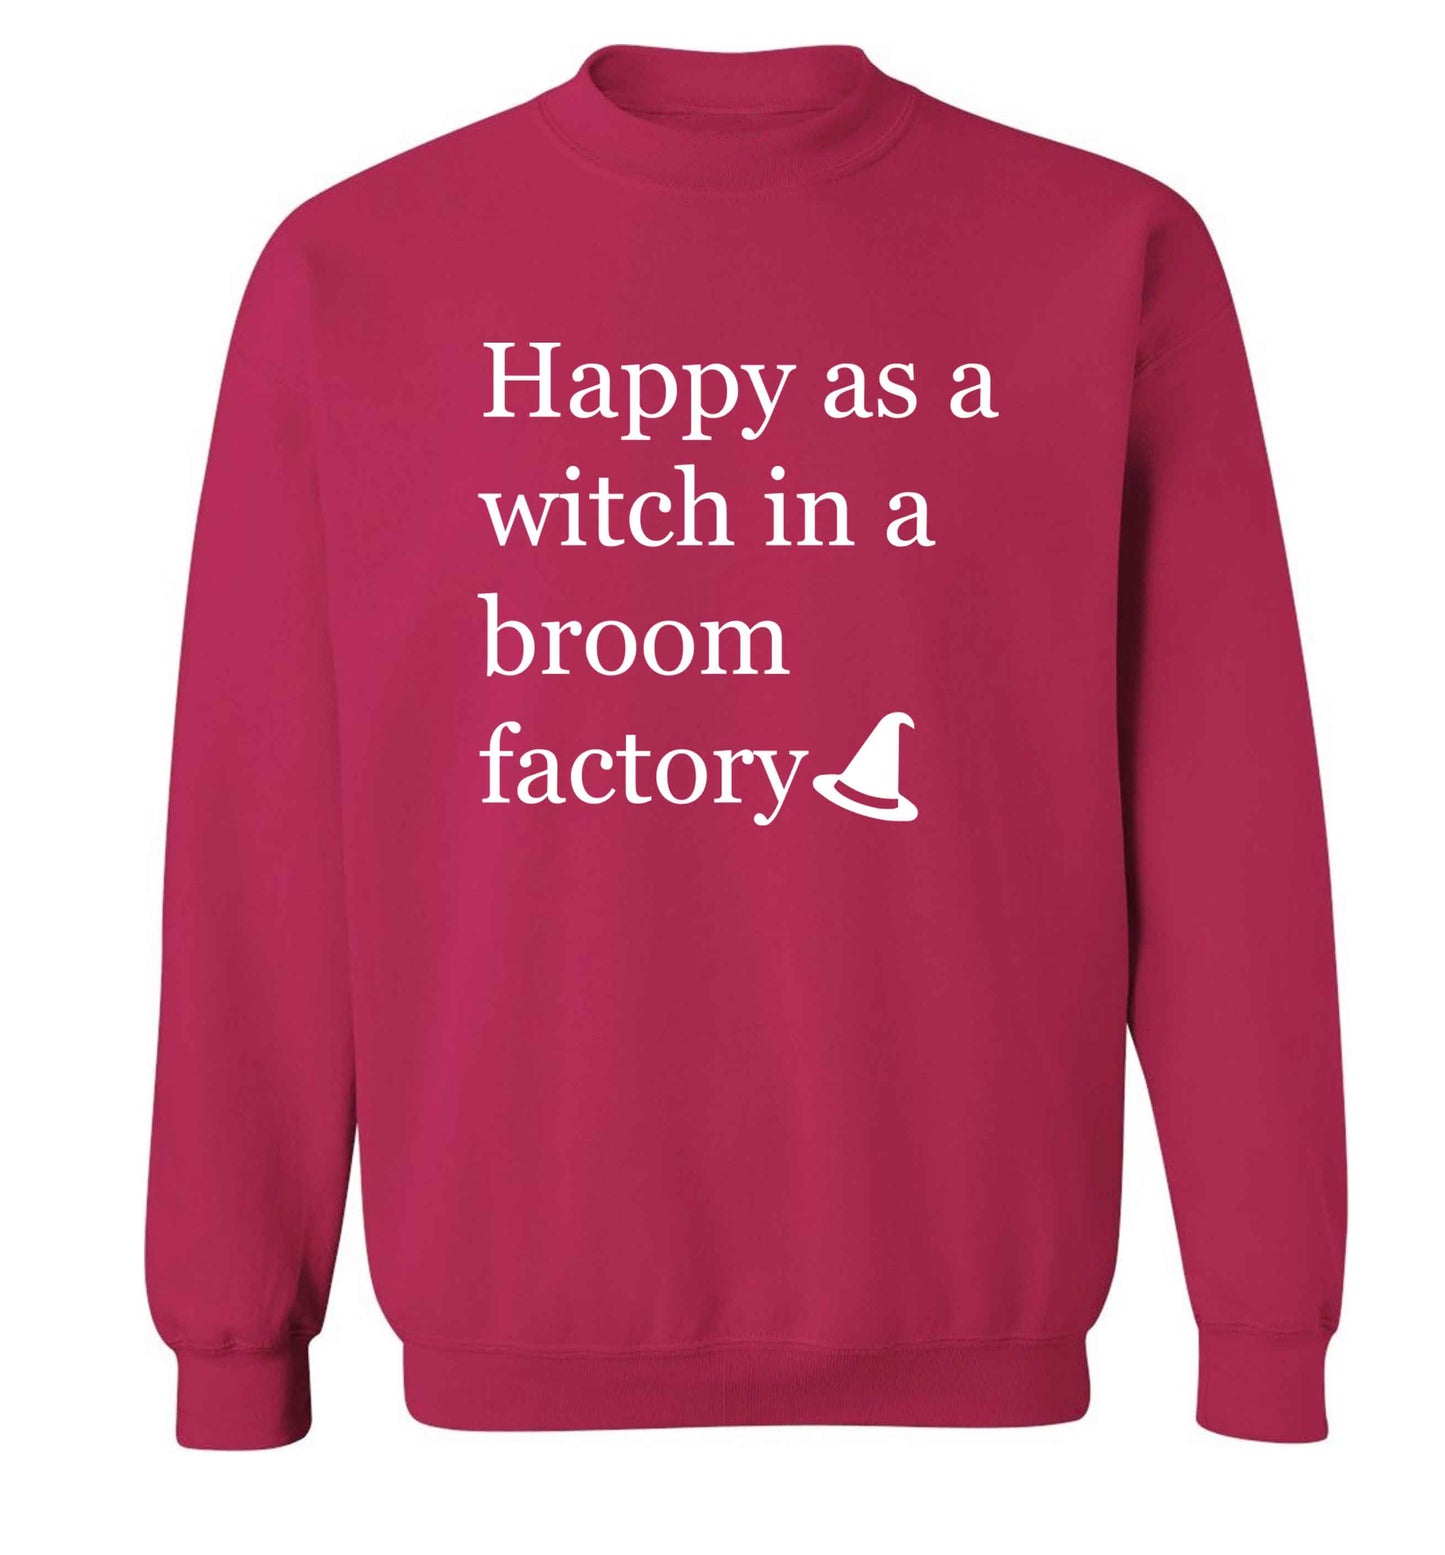 Happy as a witch in a broom factory adult's unisex pink sweater 2XL